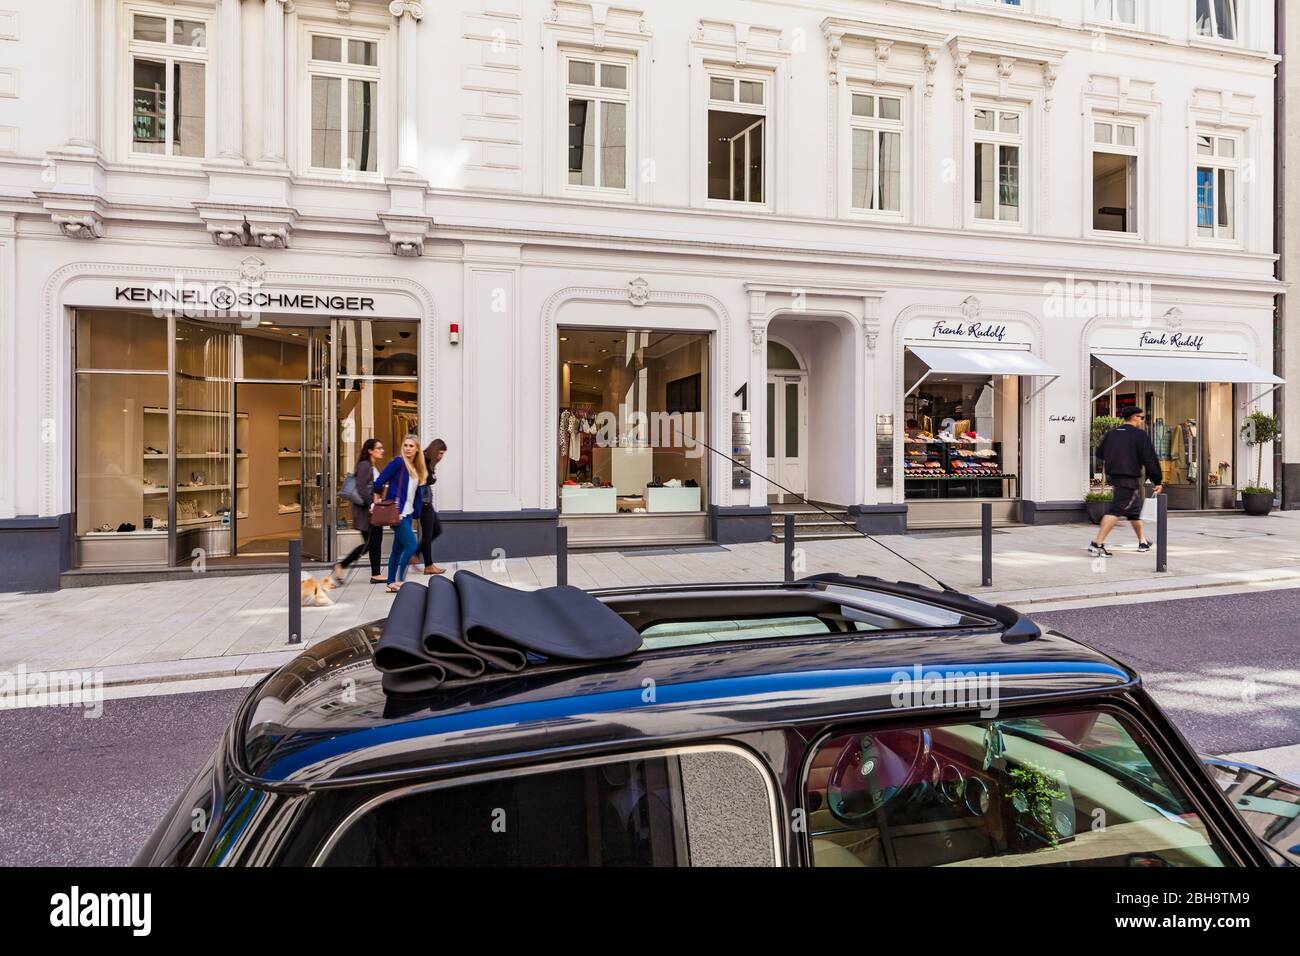 Germany, Hamburg, city center, the Gänsemarkt, shopping area, ABC street, exclusive shops, Kennel and Schmenger, shoe store, Mini Cooper Stock Photo